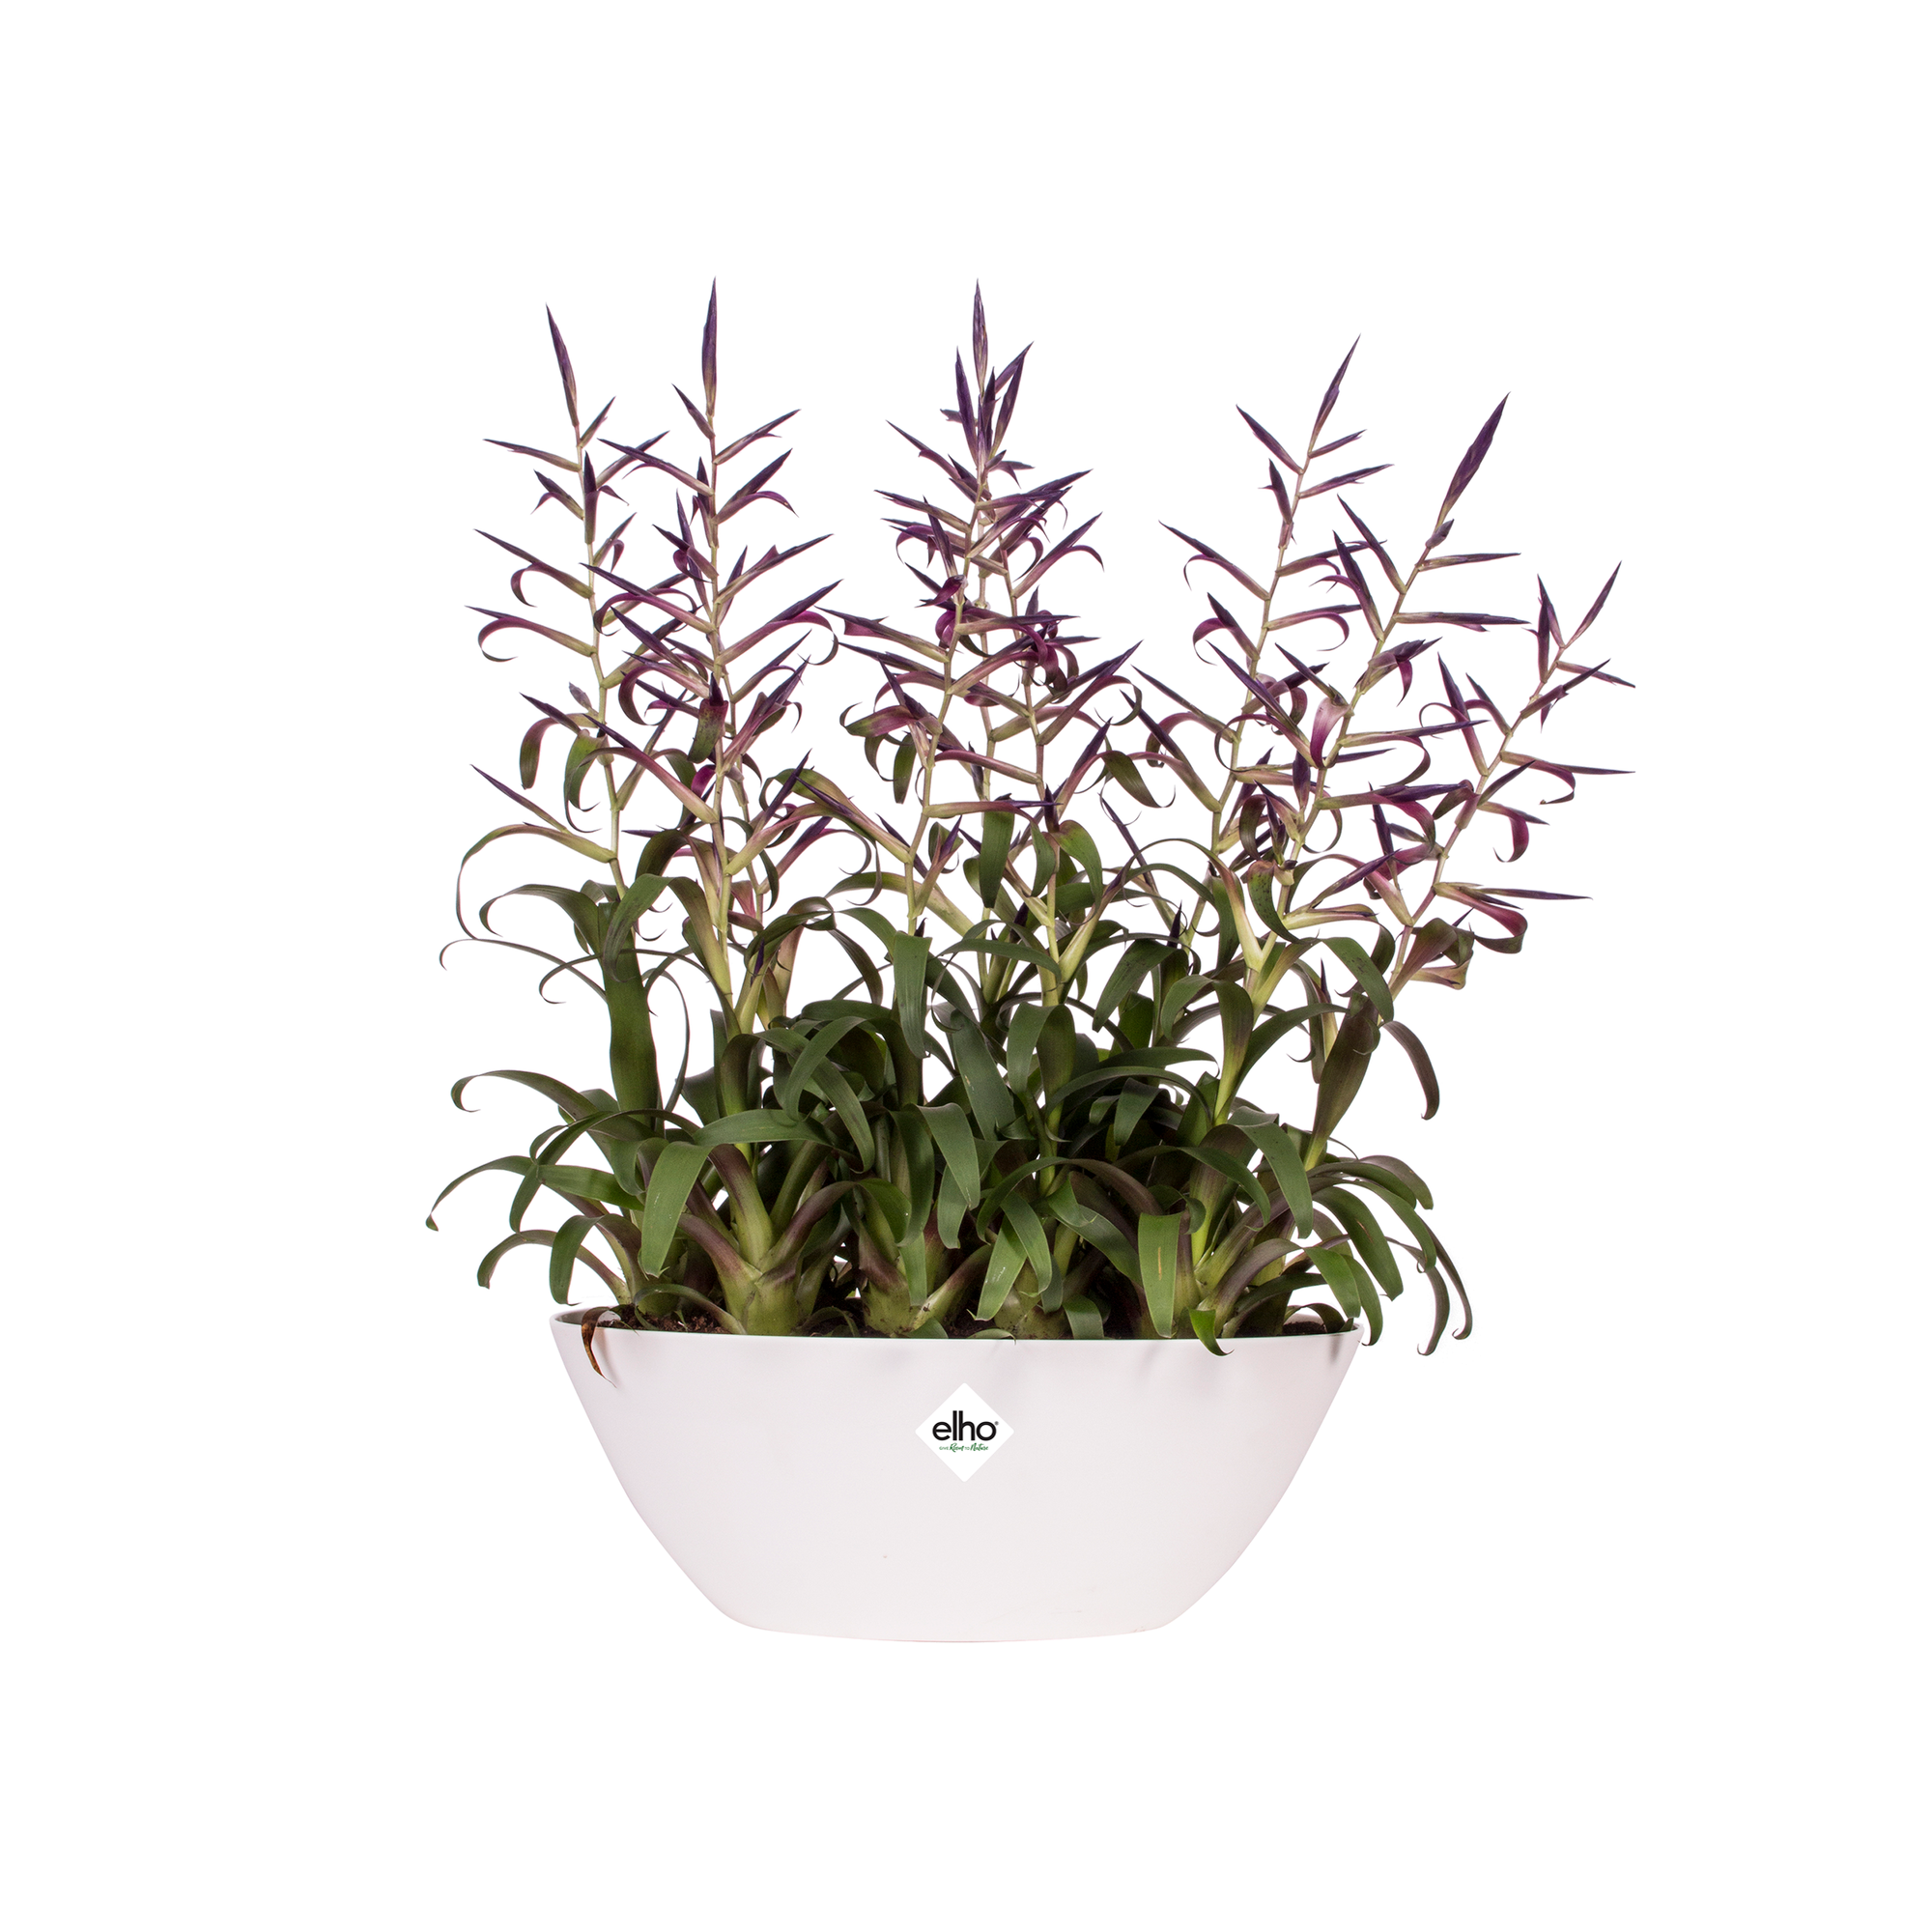 brussels oval 36cm to - room Give nature - weiss elho®